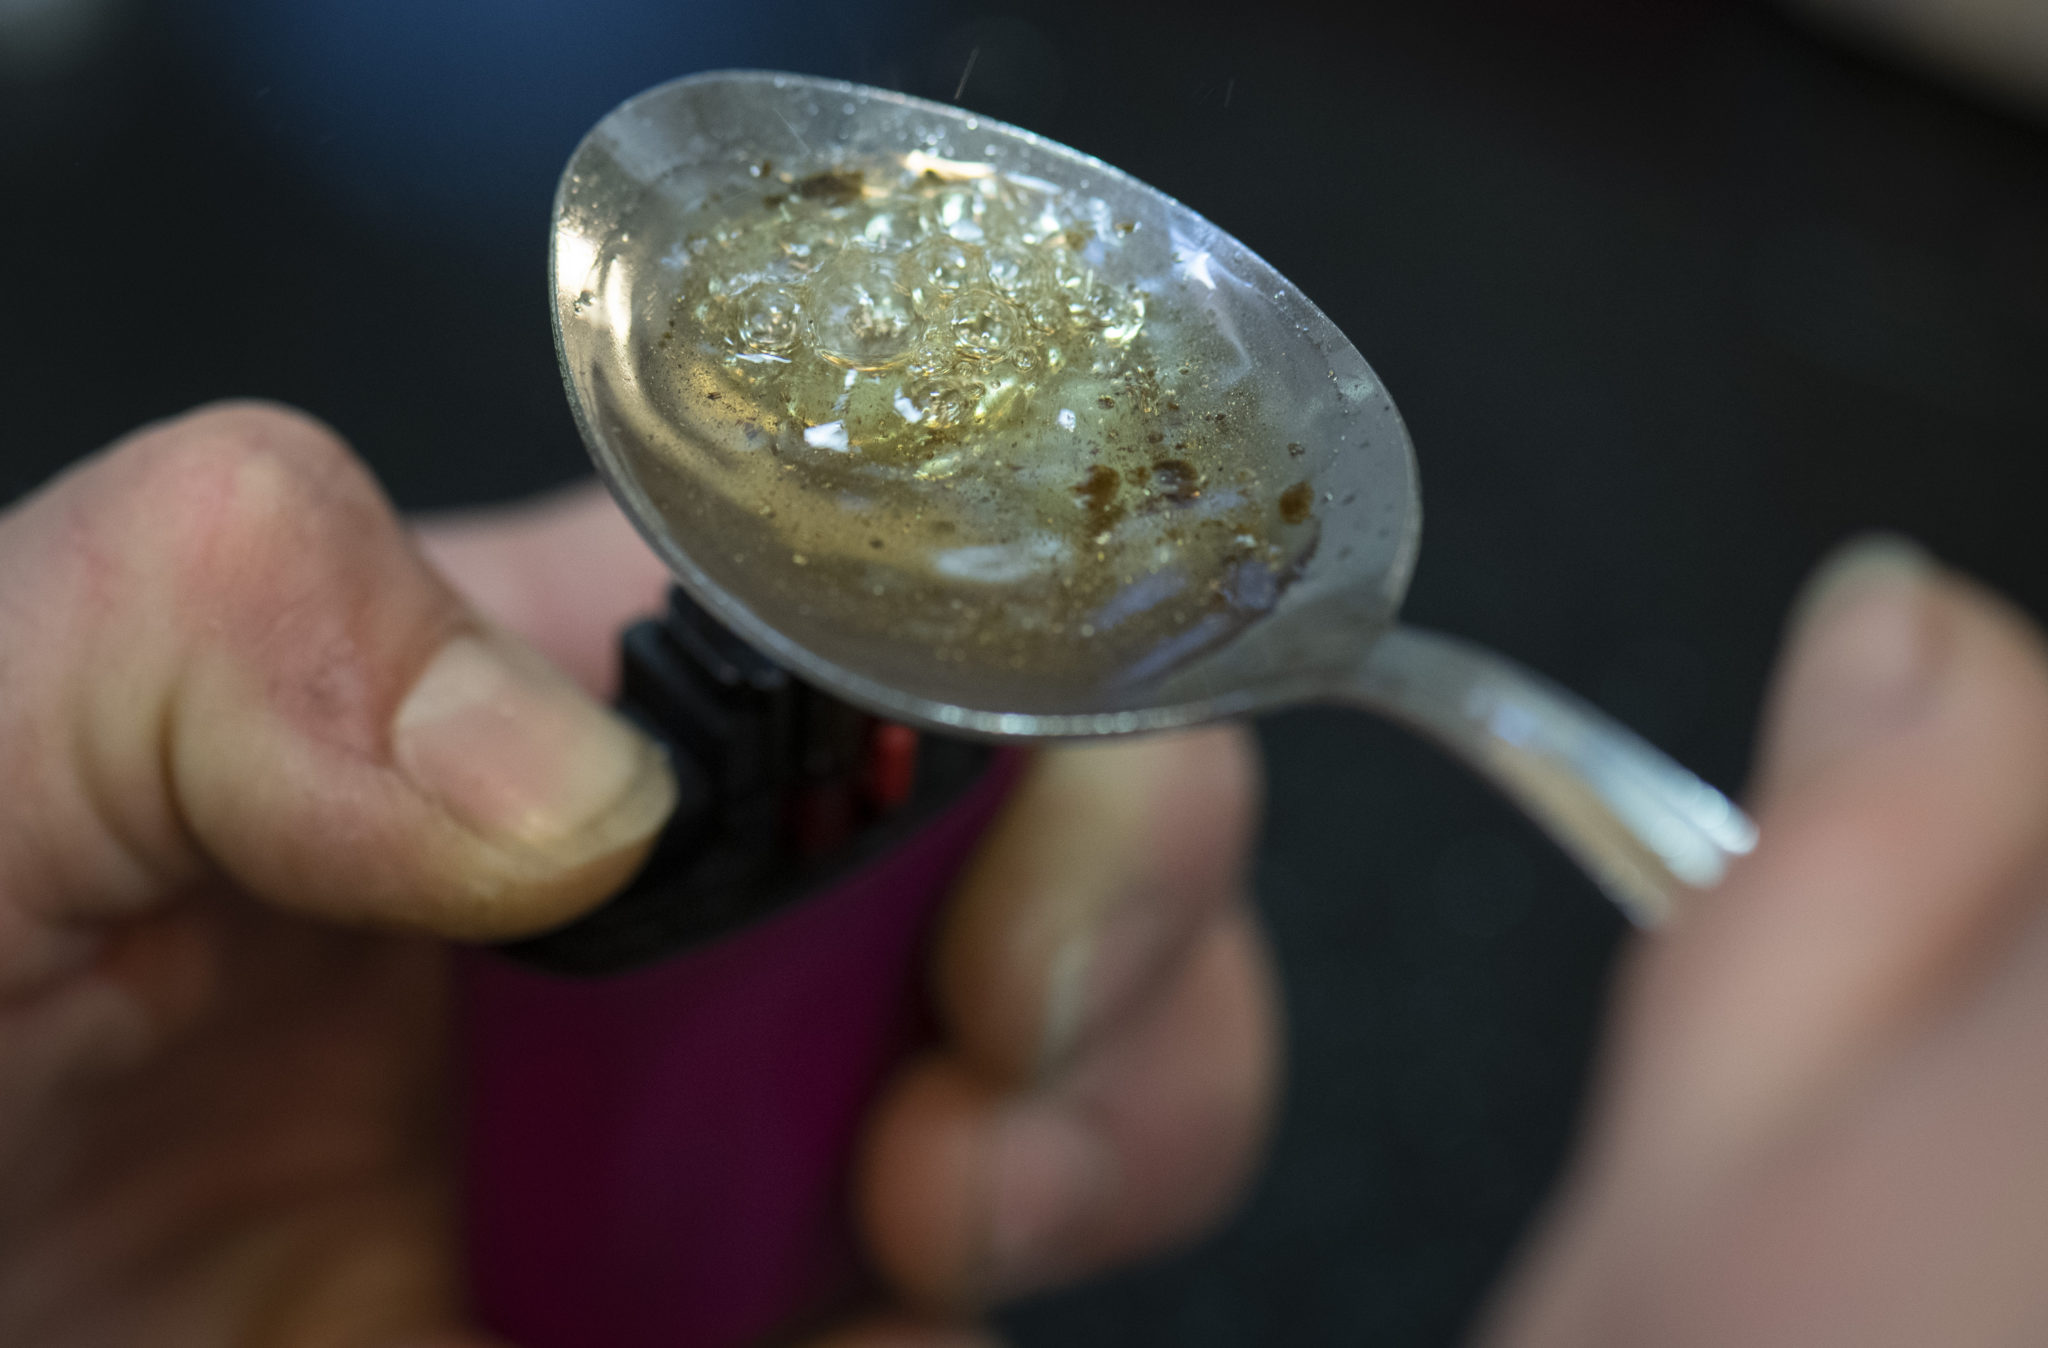 A woman boils a portion of crack cocaine in a spoon